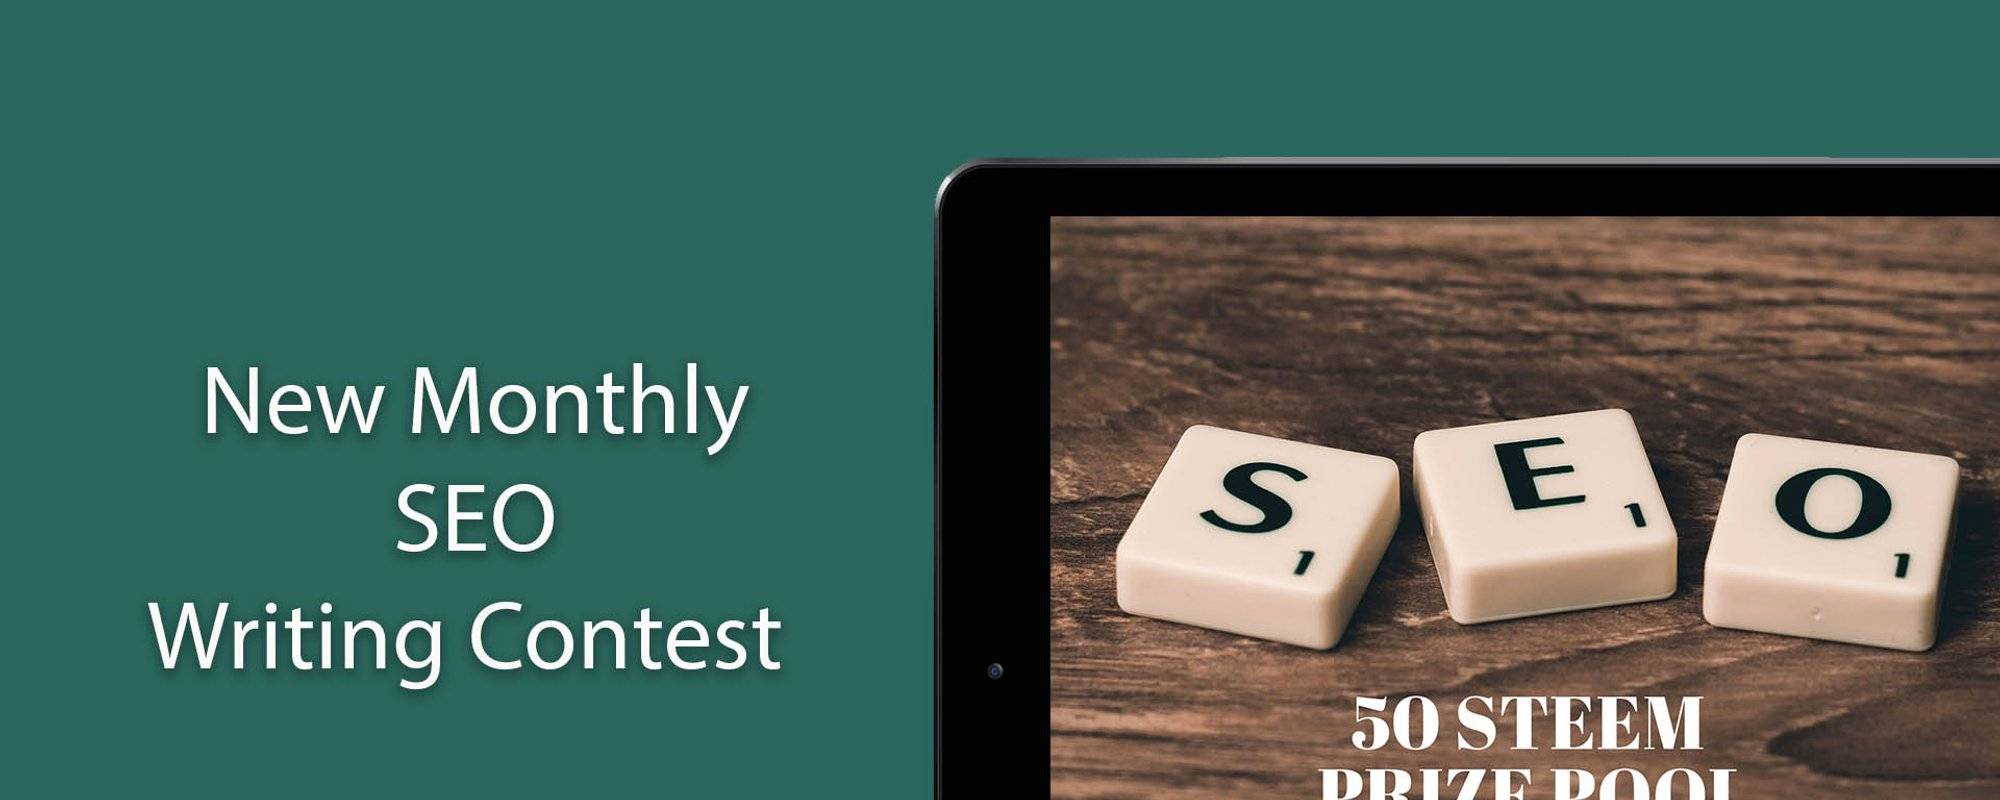 Win 50 STEEM! Join TravelFeed.io’s Monthly SEO Writing Contest